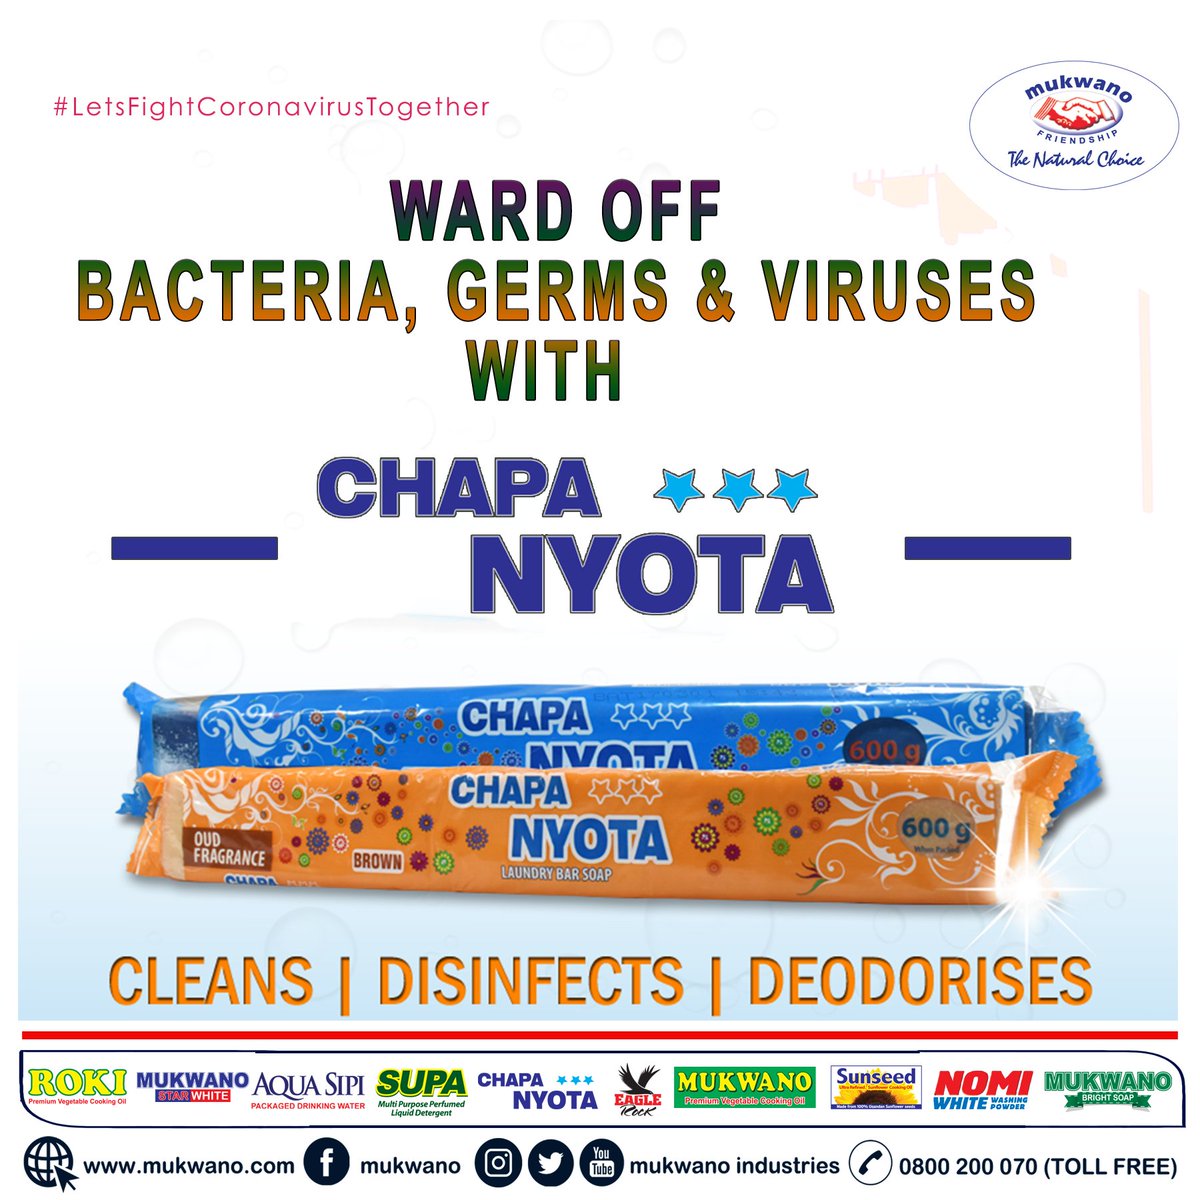 STAY SAFE!

Keep safeguarded with Chapa Nota, a quick wash will ward off those head-strong germs, bacteria or viruses!

#WashYourHands #WashToCare #StayHomeSaveLives #StayHome #COVID19Pandemic
#Mukwano